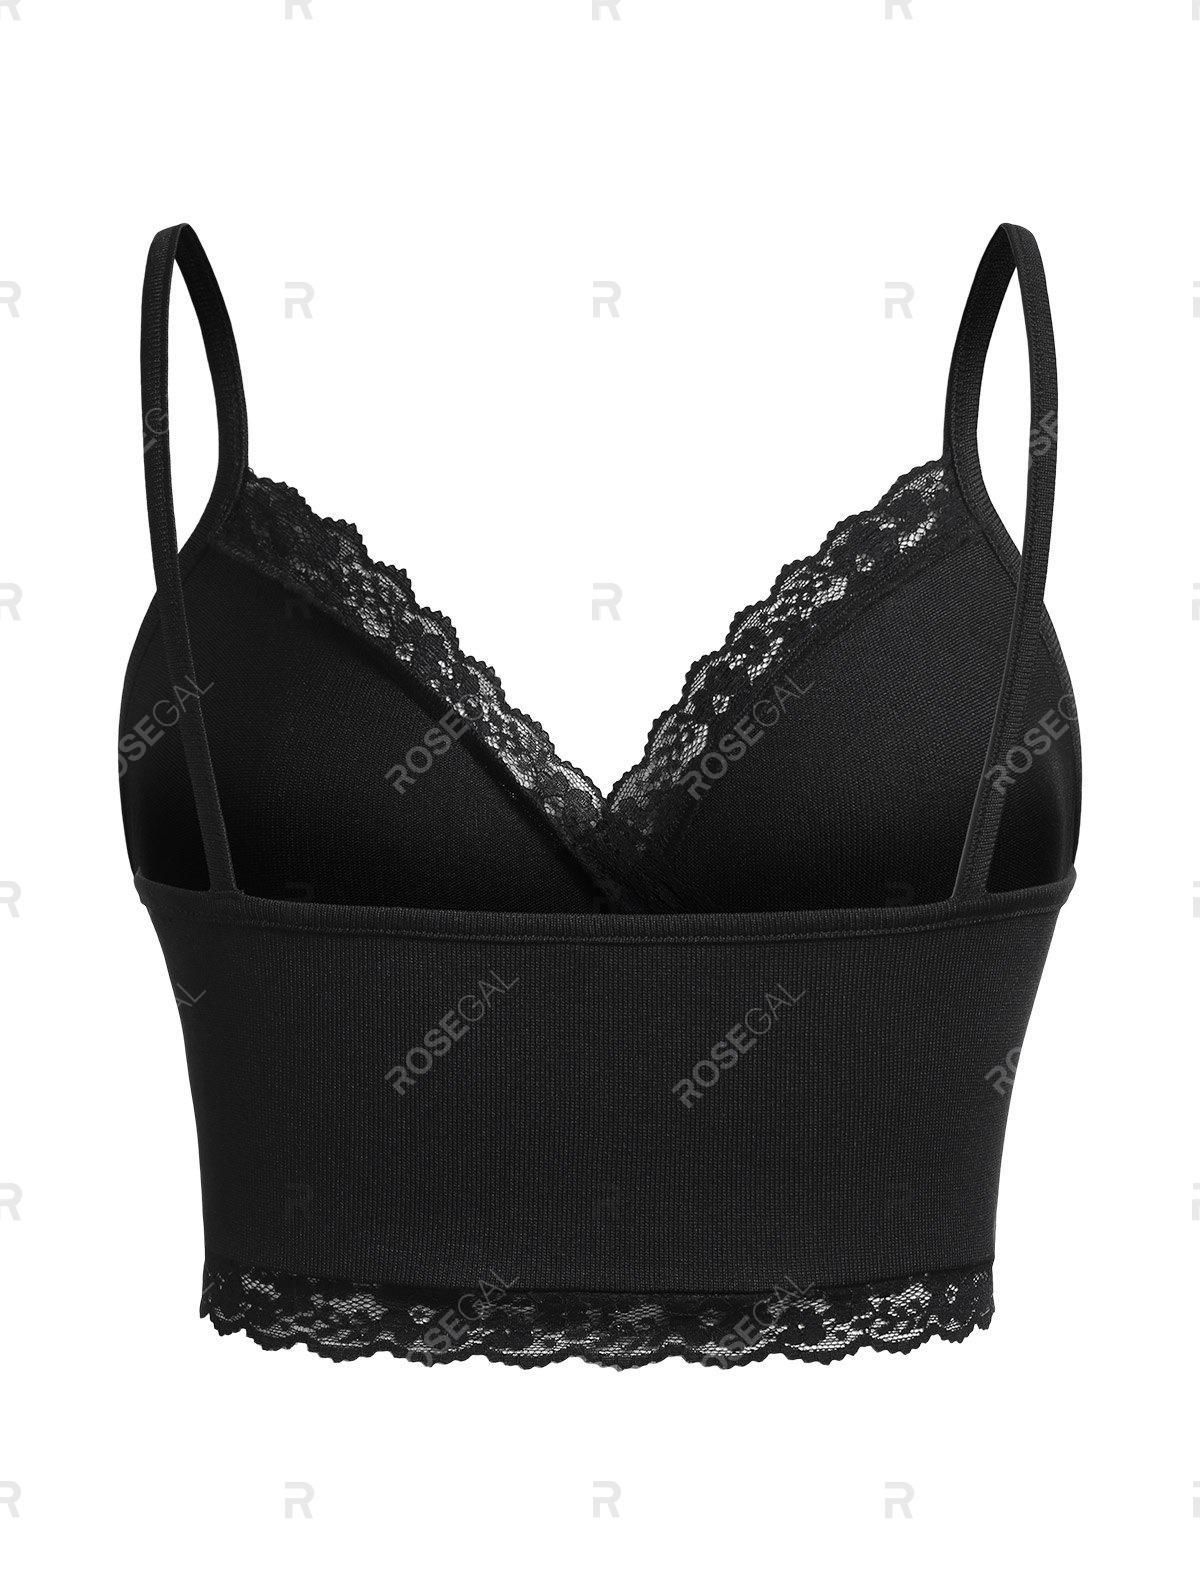 Plus Size & Curve Basic Lace Panel Bra Camisole - L price from rosegal ...